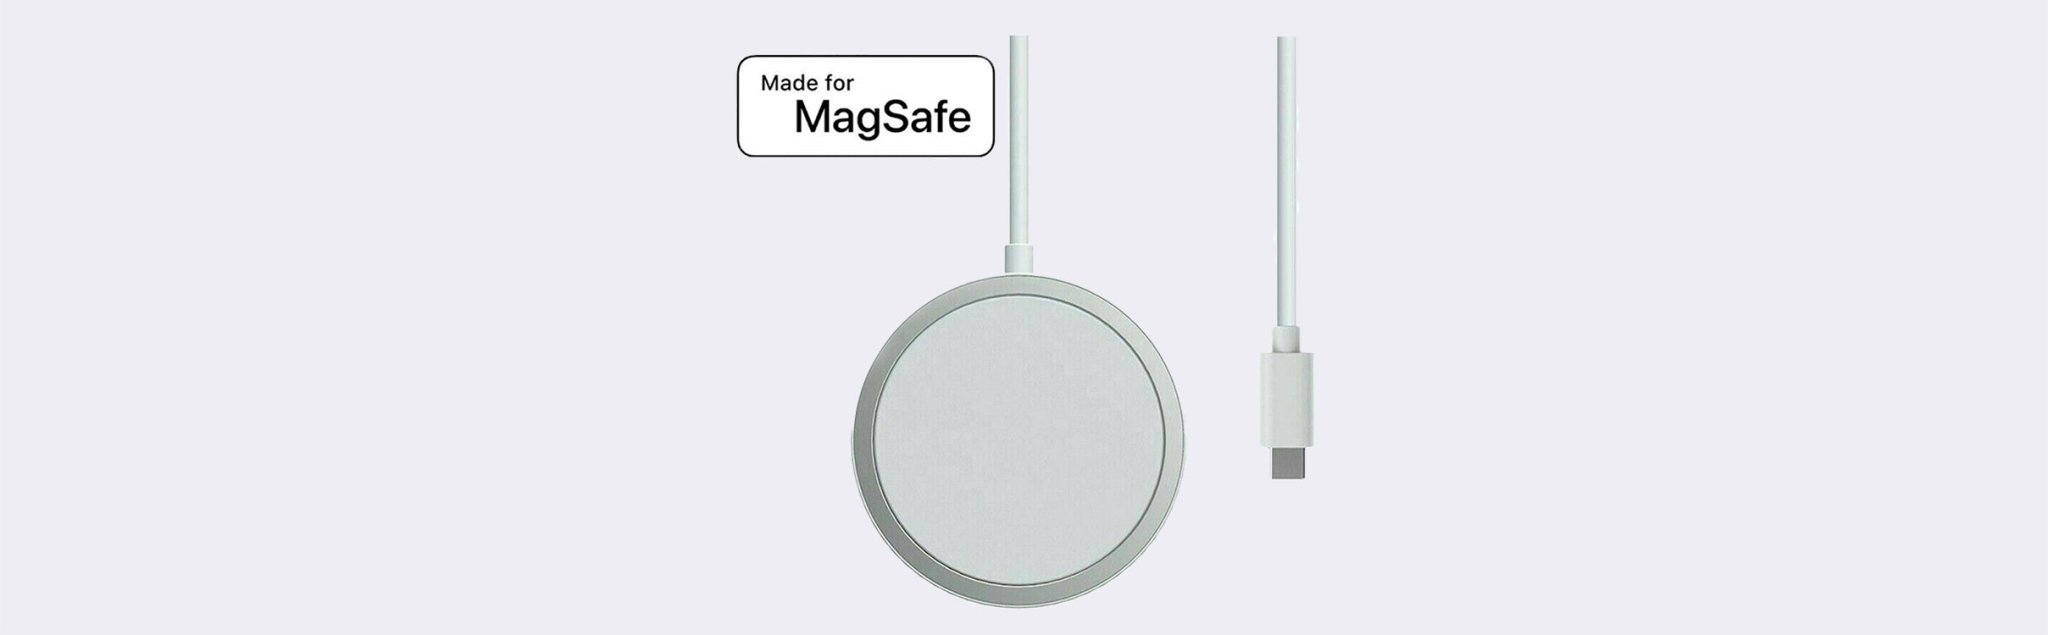 Magsafe - Accessories Gifts UK